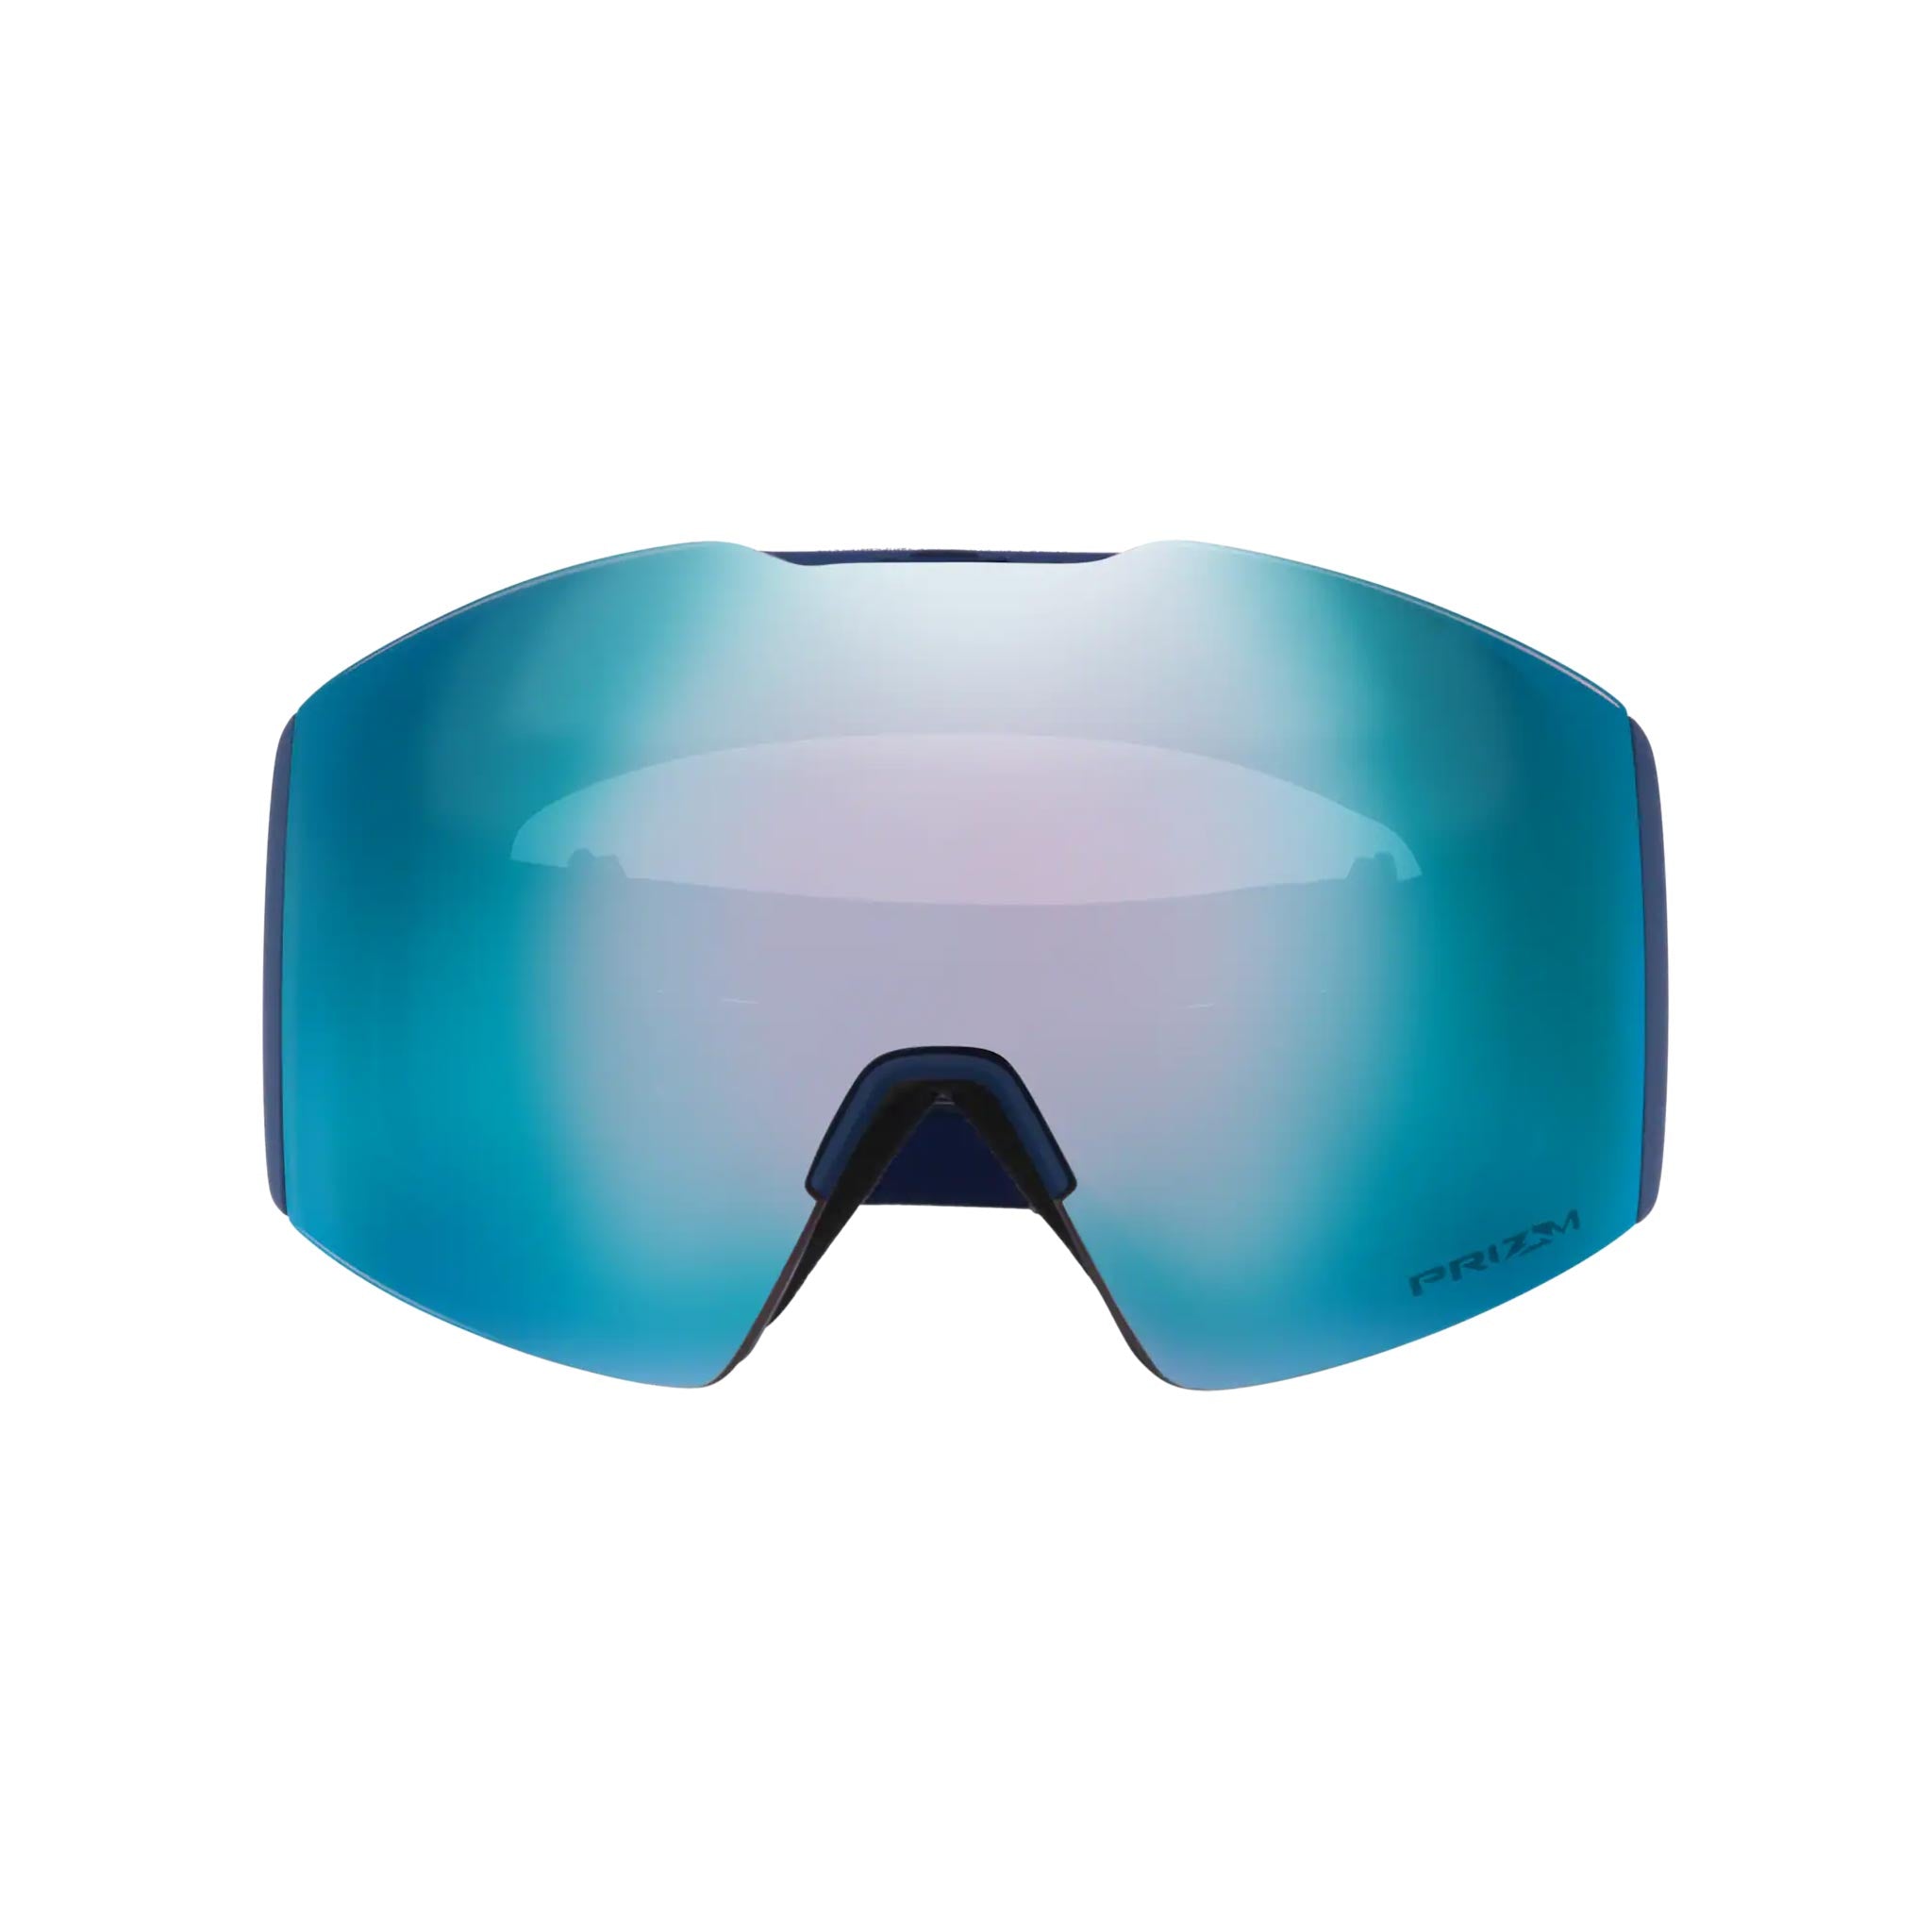 Fall Line L Snow Goggles in Navy